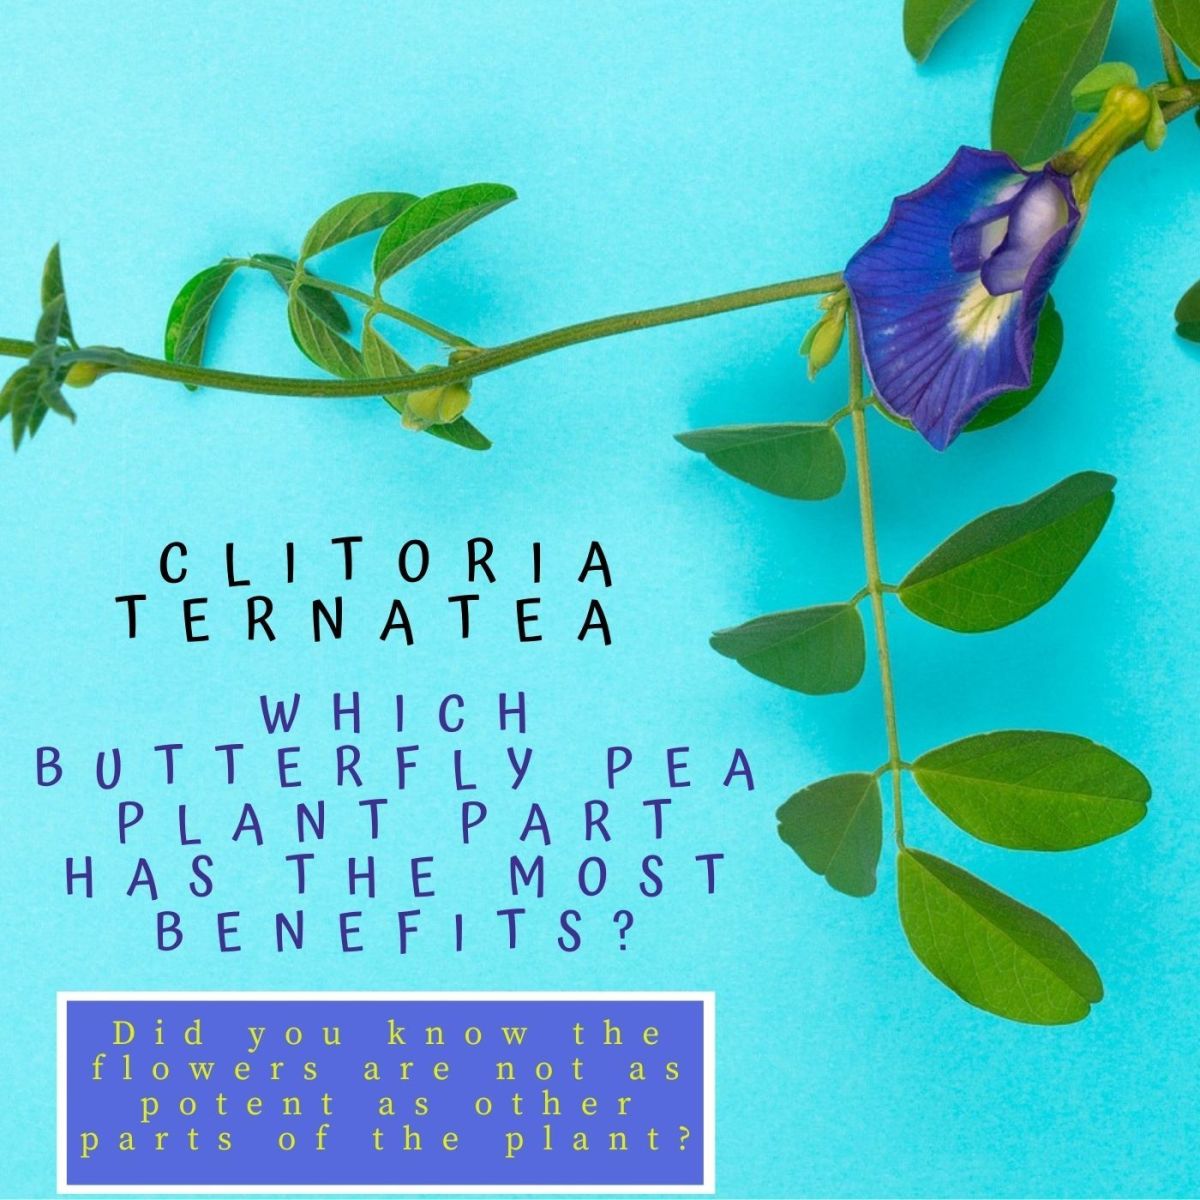 Clitoria Ternatea (Butterfly Pea) Plant With The Most Benefits